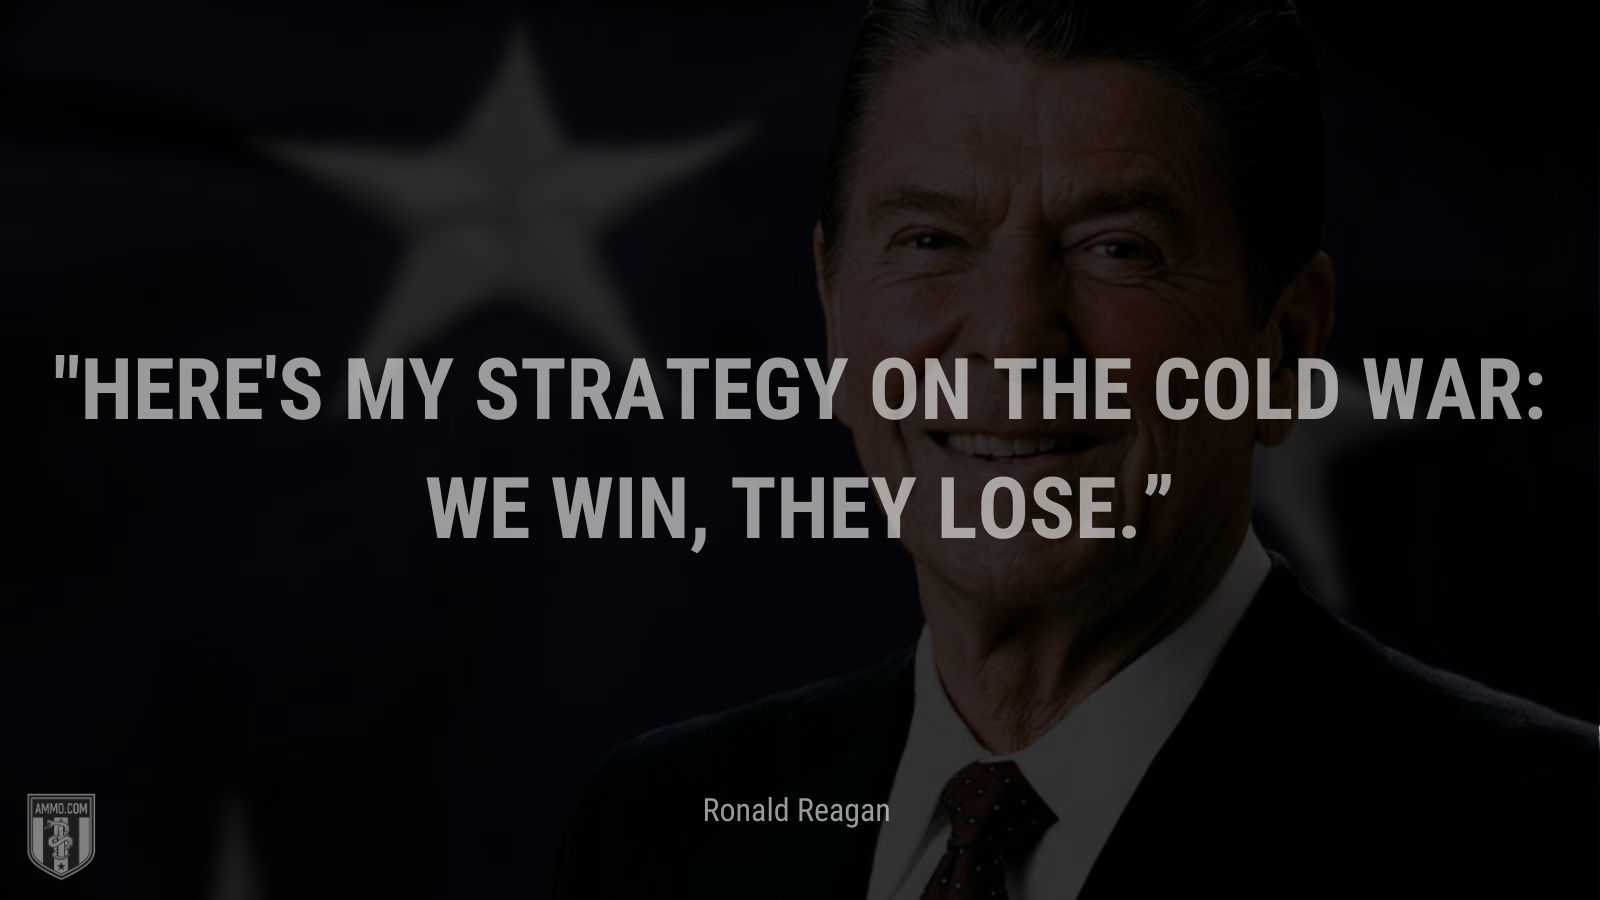 “Here's my strategy on the Cold War: We win, they lose.” - Ronald Reagan